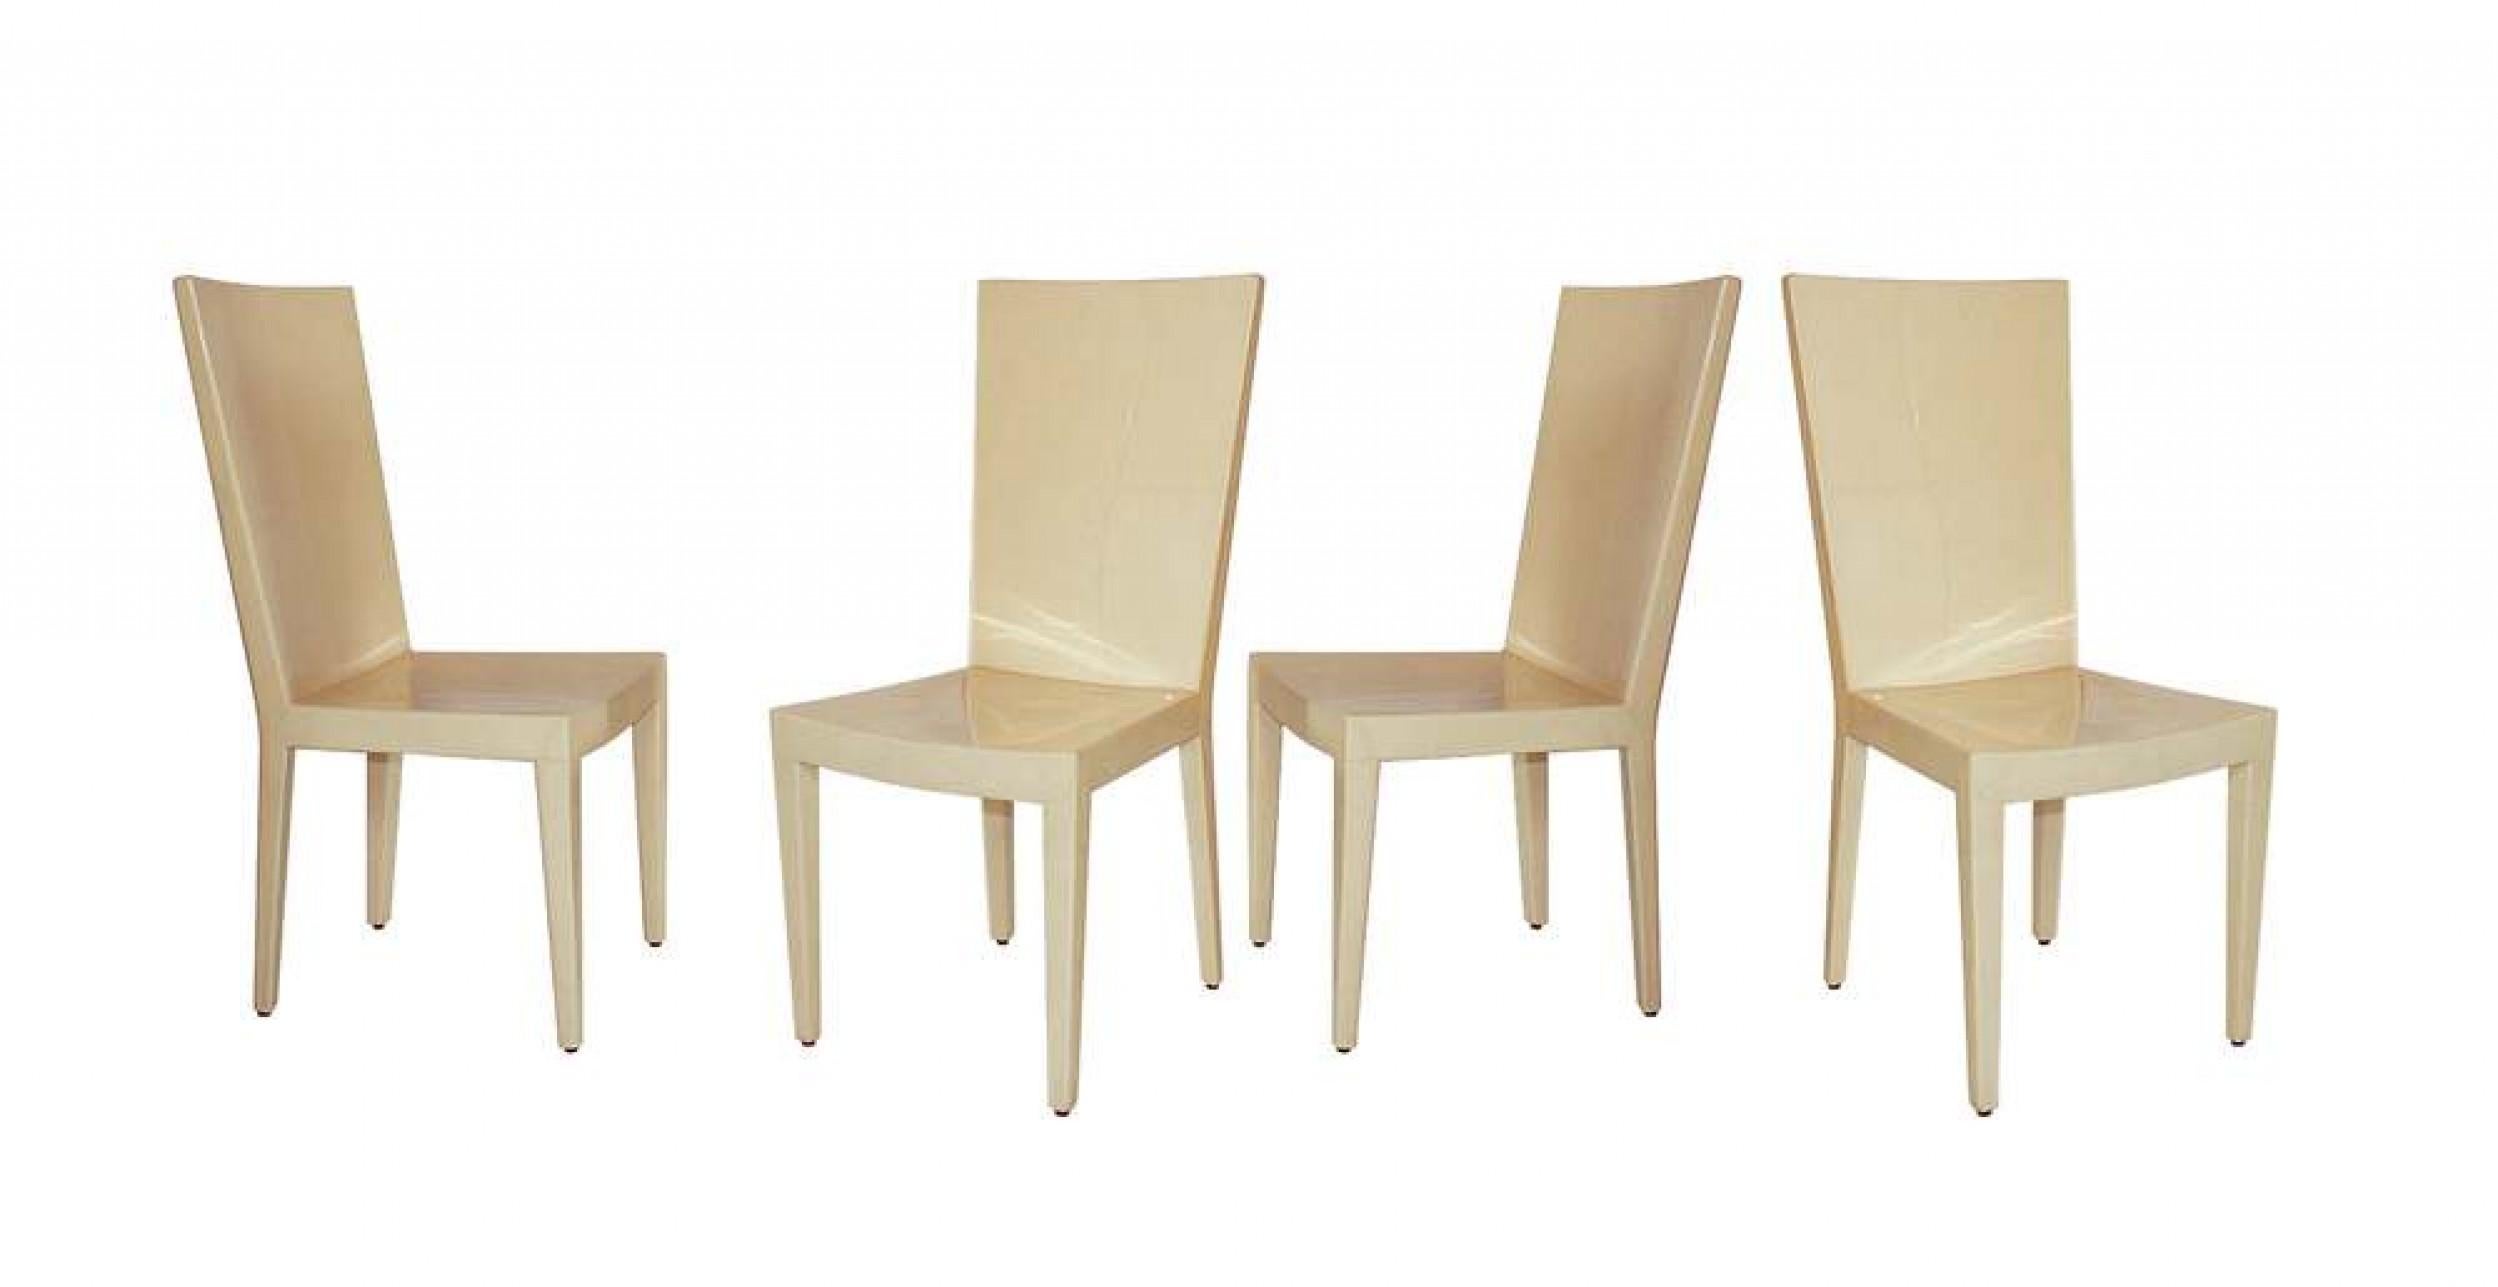 Parchment Paper Karl Springer Mid-Century Modern Lacquered Beige Parchment Side / Dining Chairs For Sale